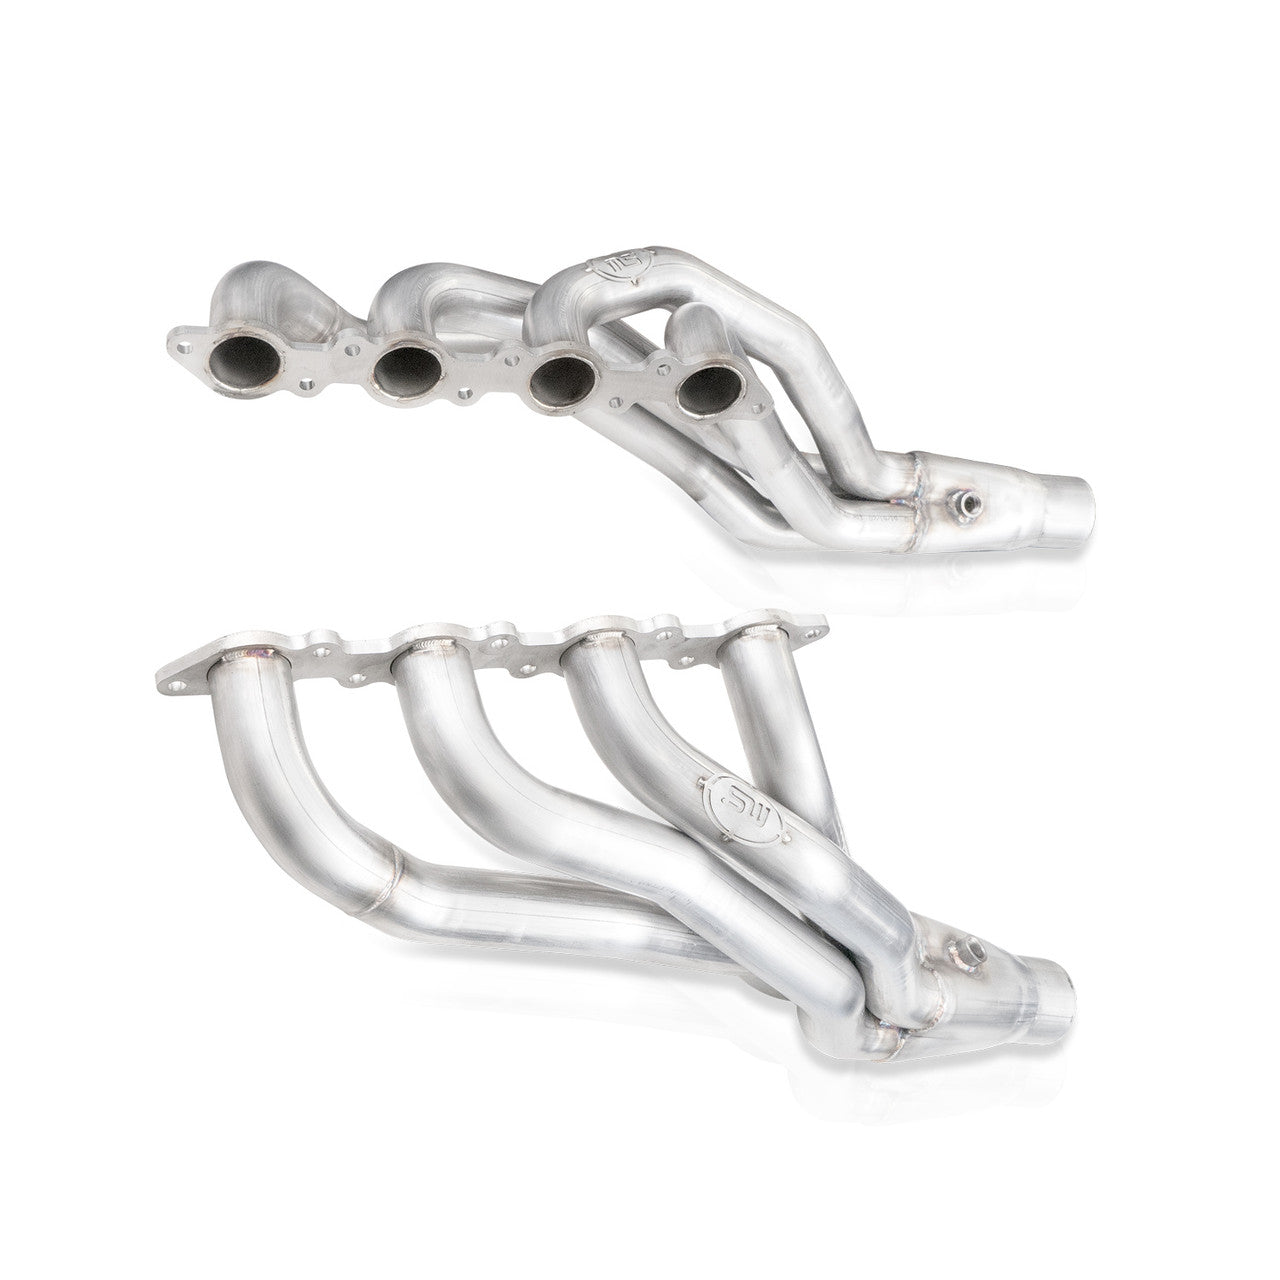 Stainless Works 20-21 Ford F-250/F-350 7.3L Headers 2in Primaries 3in Collectors High Flow Cats